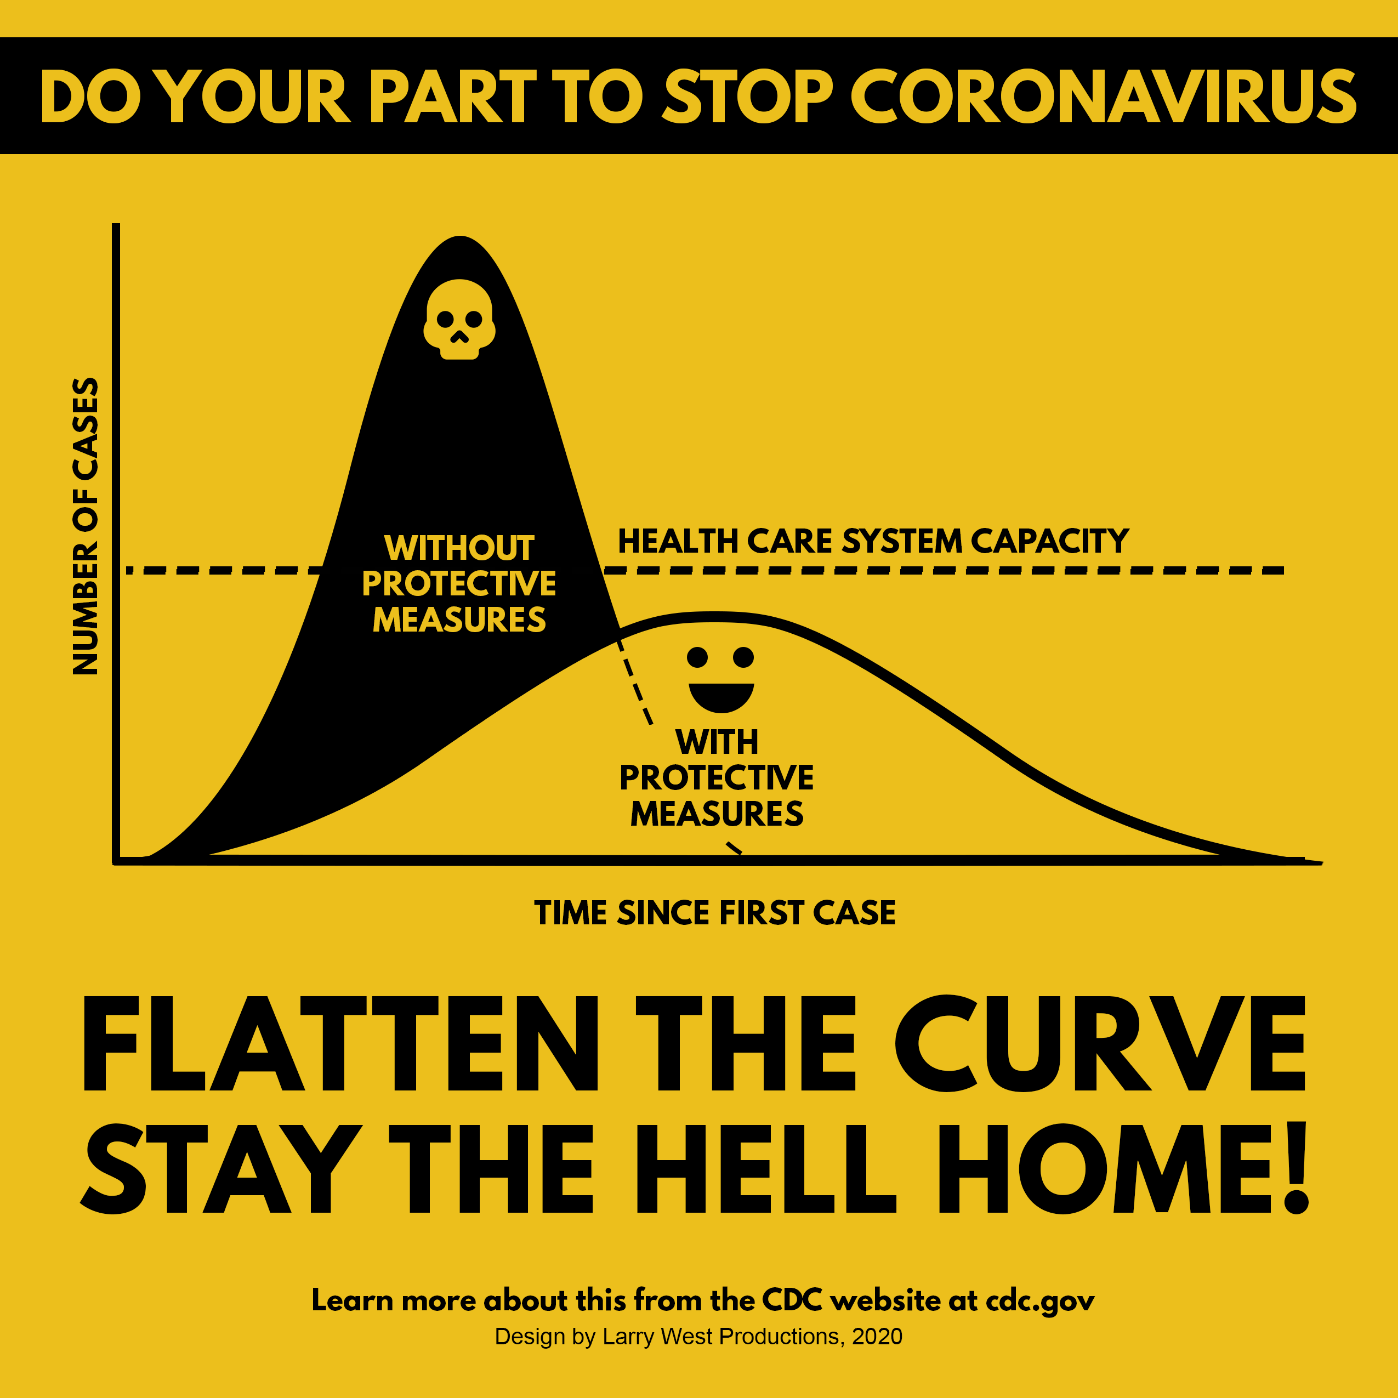 Flatten the curve, stay the hell home!